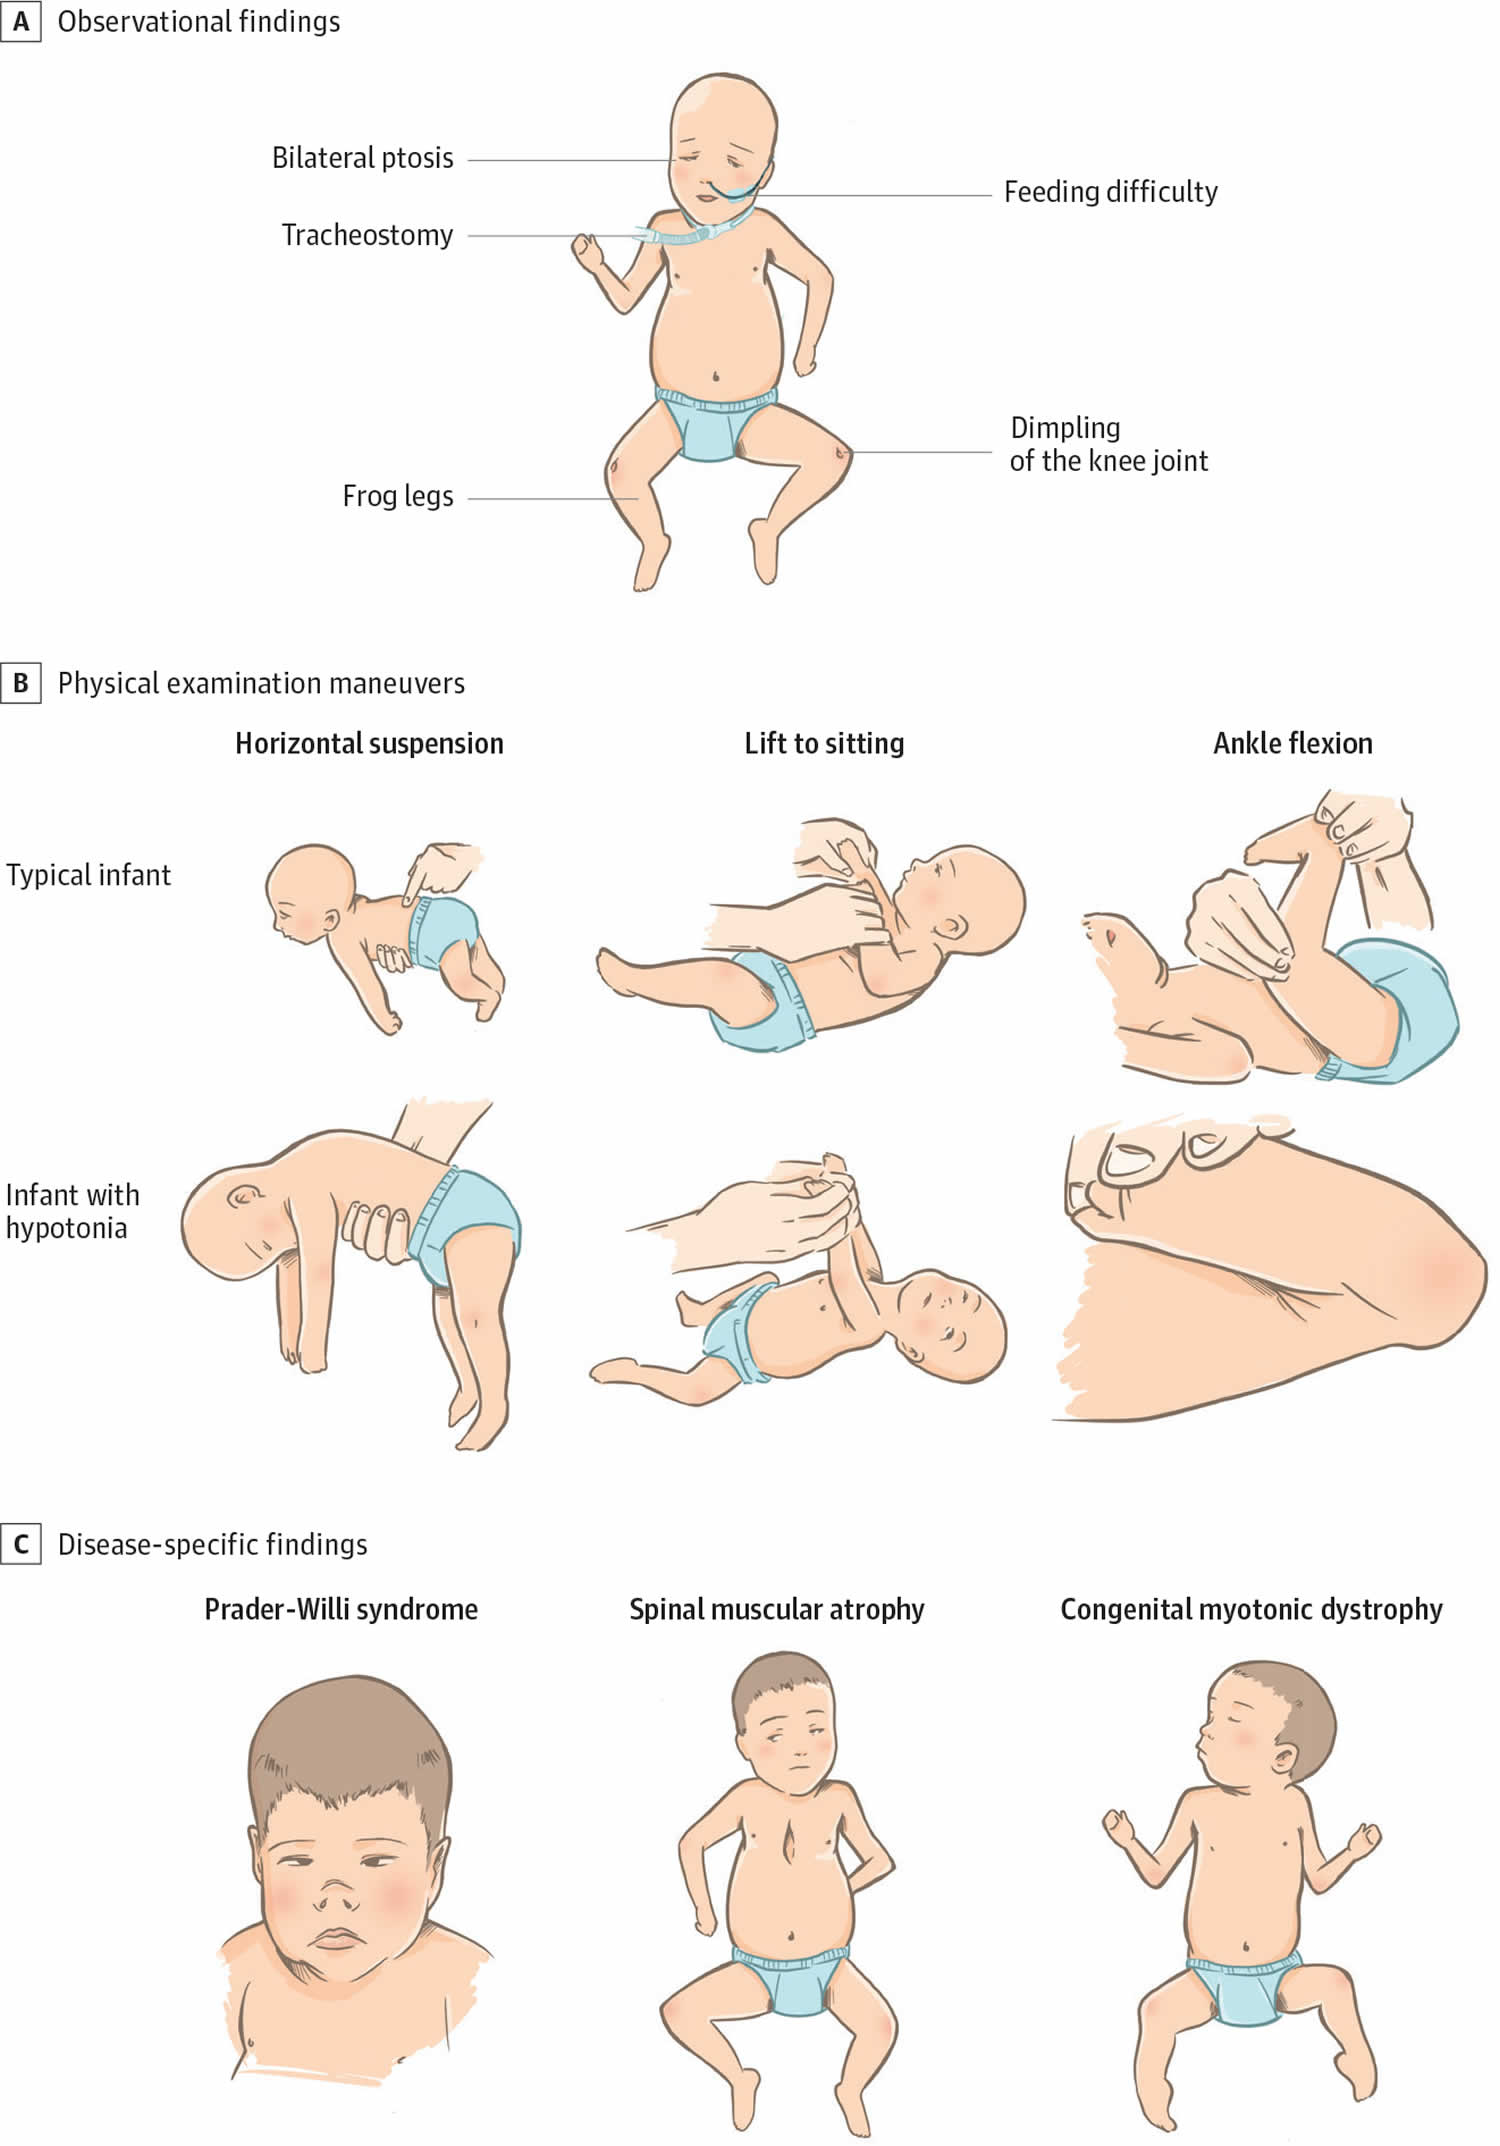 Physical examination findings in floppy infant syndrome